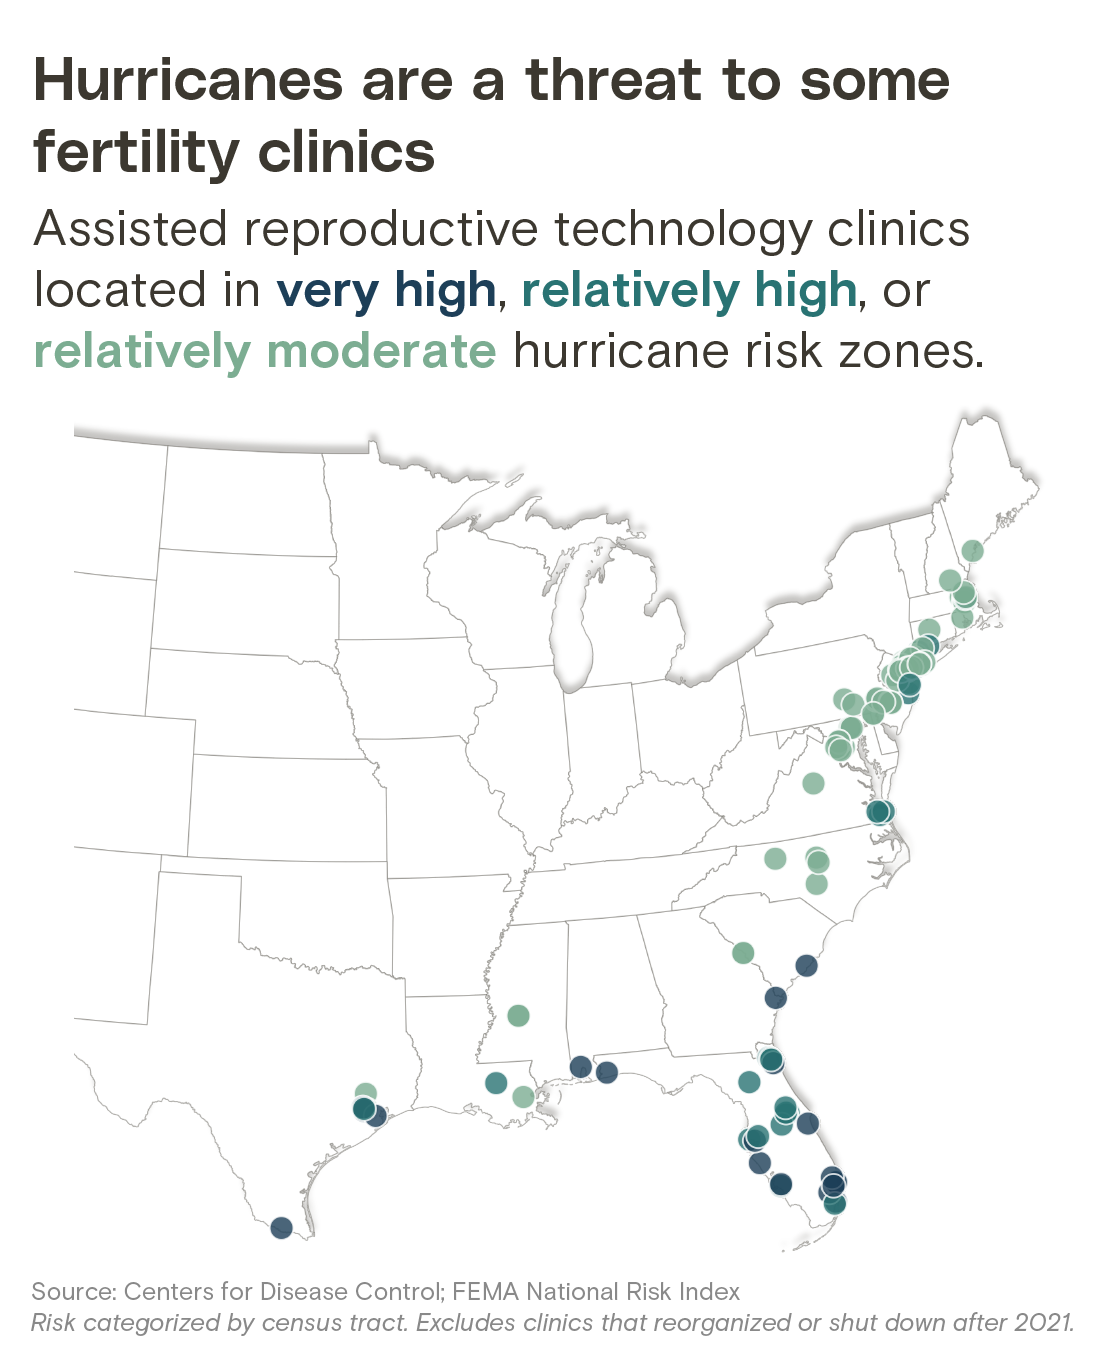 A map showing assisted reproductive technology clinics located in hurricane risk zones. The Gulf Coast is particularly vulnerable.